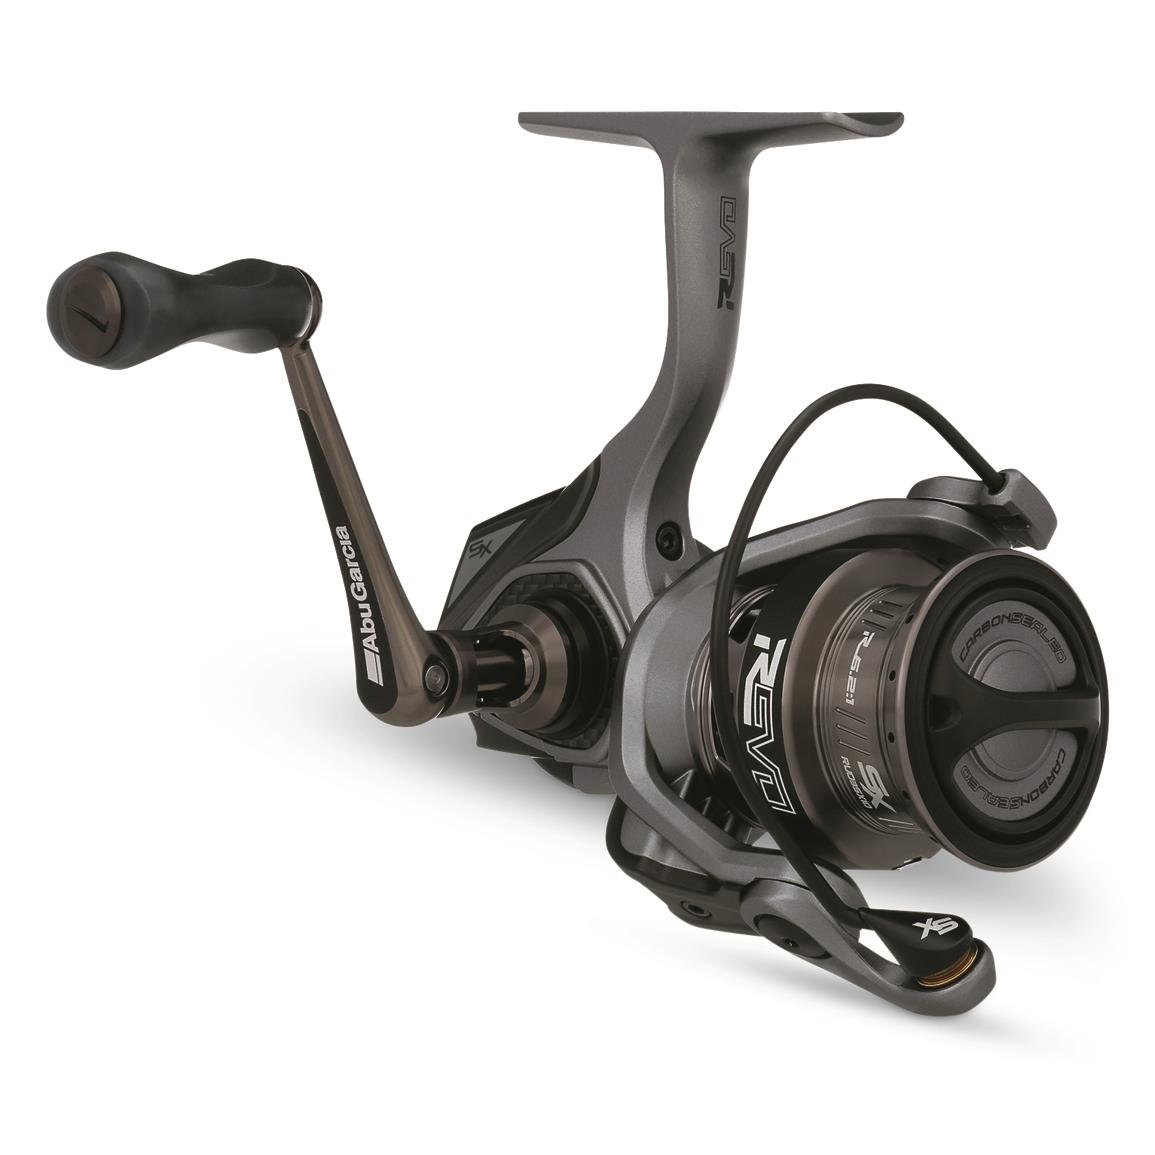 13 Fishing Kalon C Spinning Reel, 5.4:1 Gear Ratio, Size 500 - 725674, Spinning  Reels at Sportsman's Guide